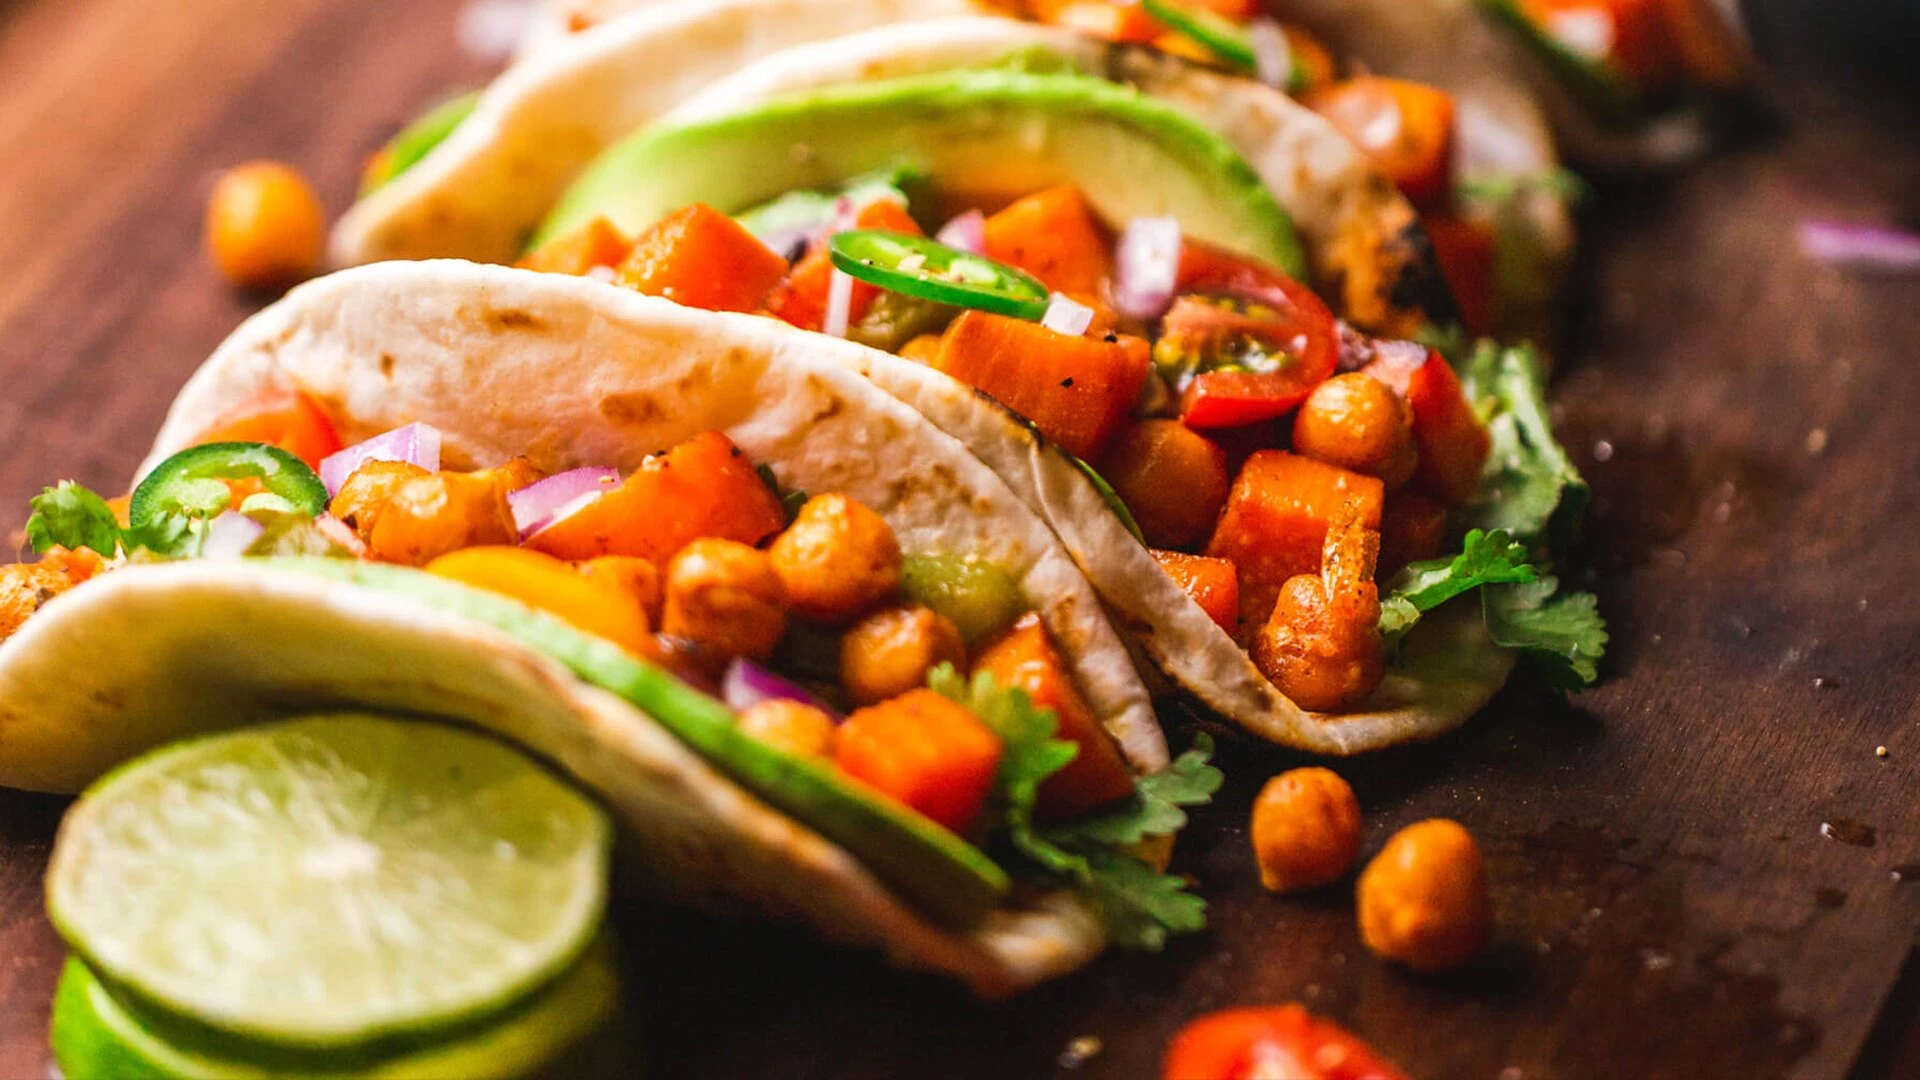 A photo of chickpea and vegetable tacos, healthy meals for seniors